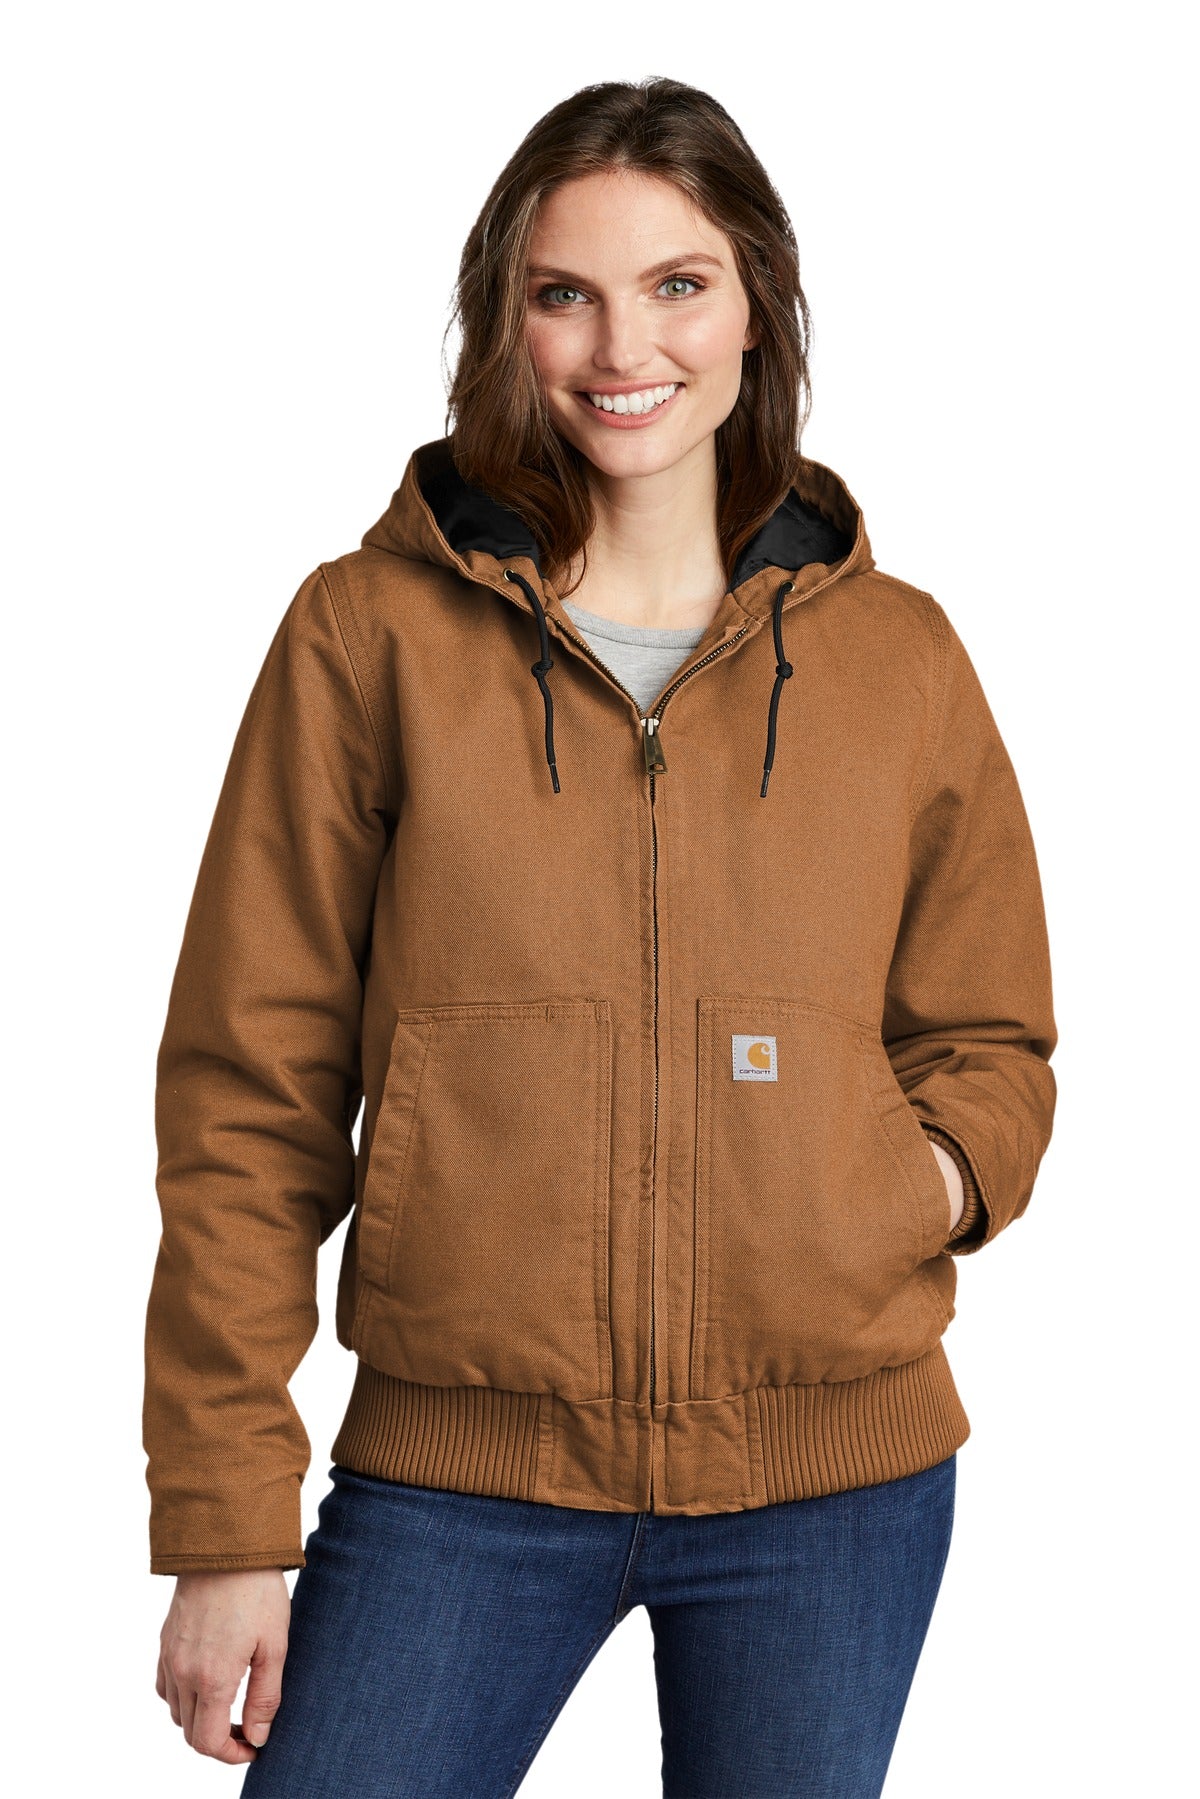 Carhartt® Women's Washed Duck Active Jac. CT104053